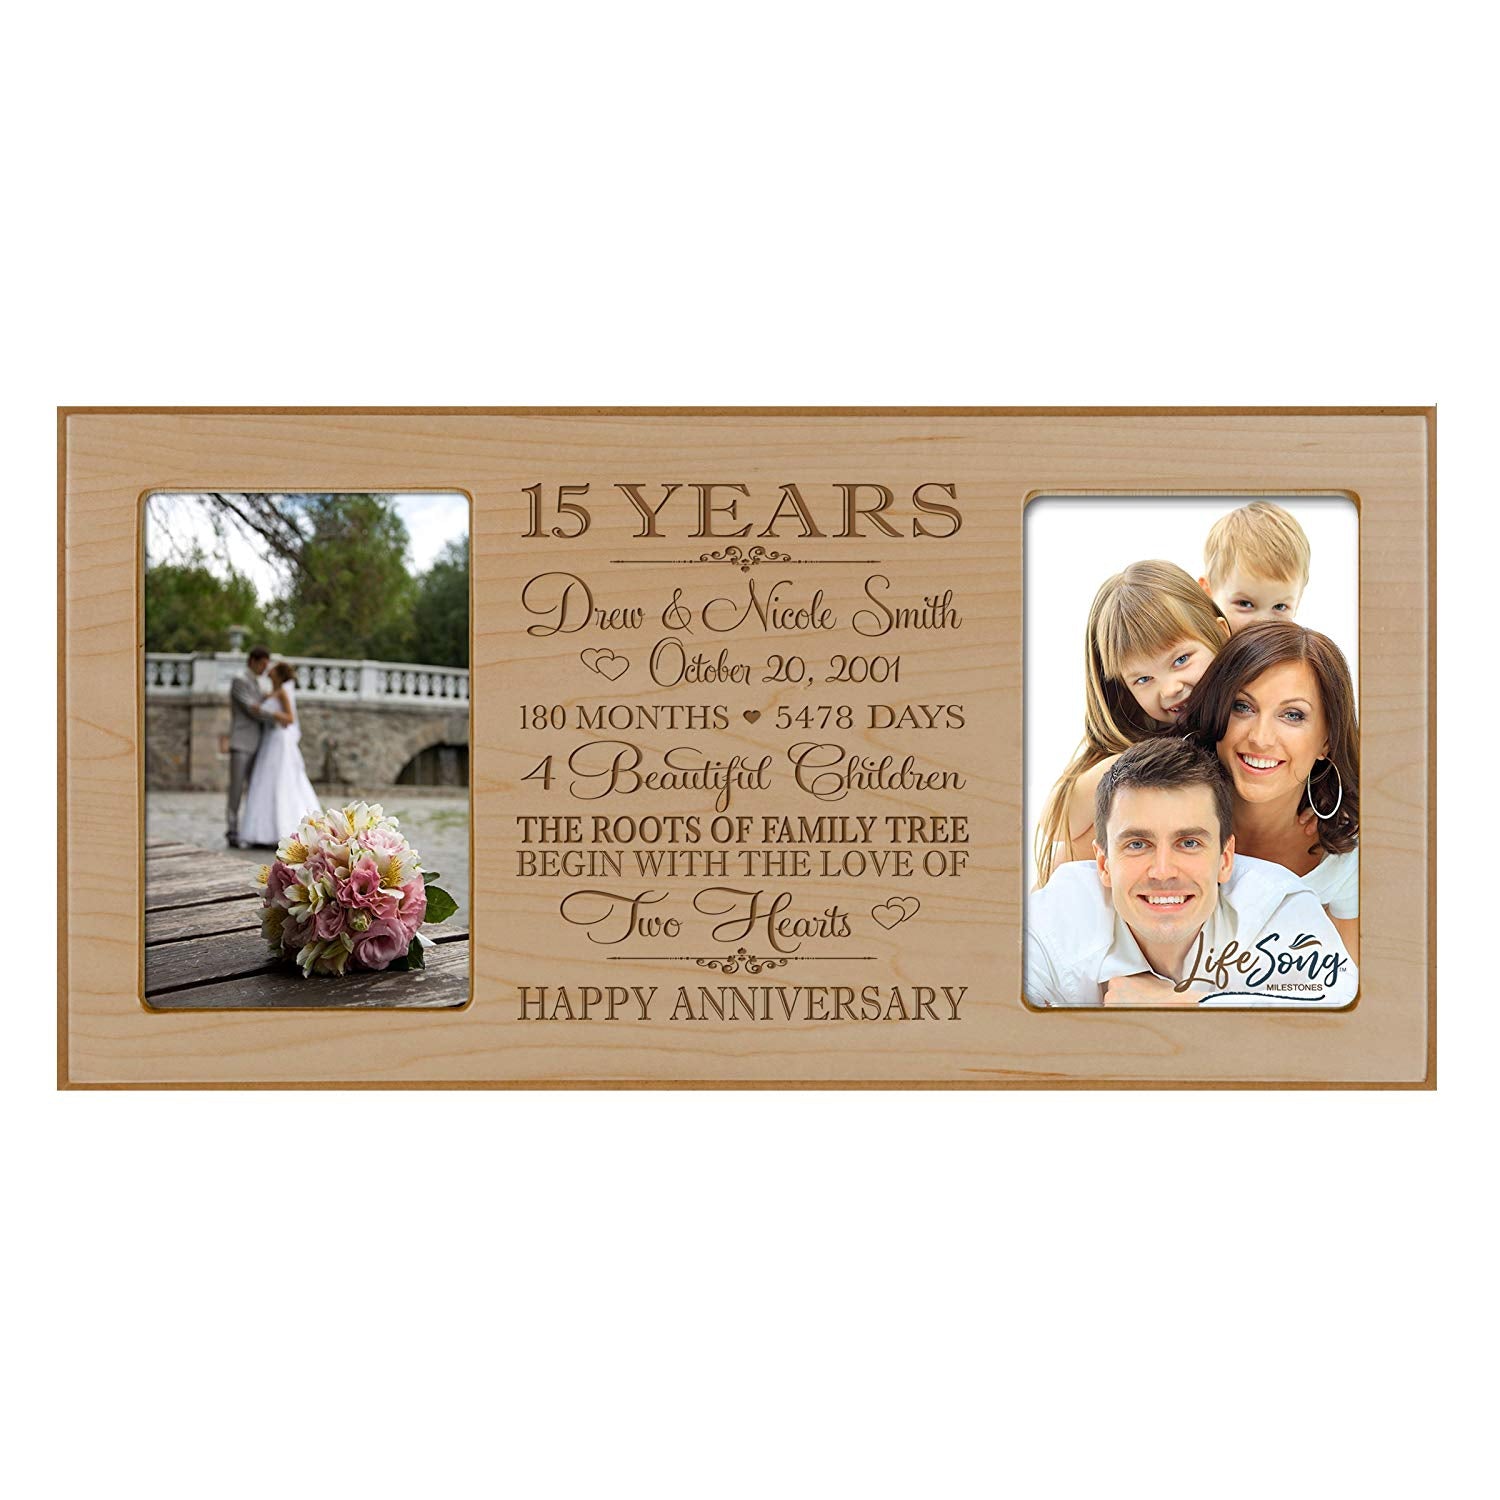 Lifesong Milestones Personalized Picture Frame for Couples 15th Wedding Anniversary Decorations